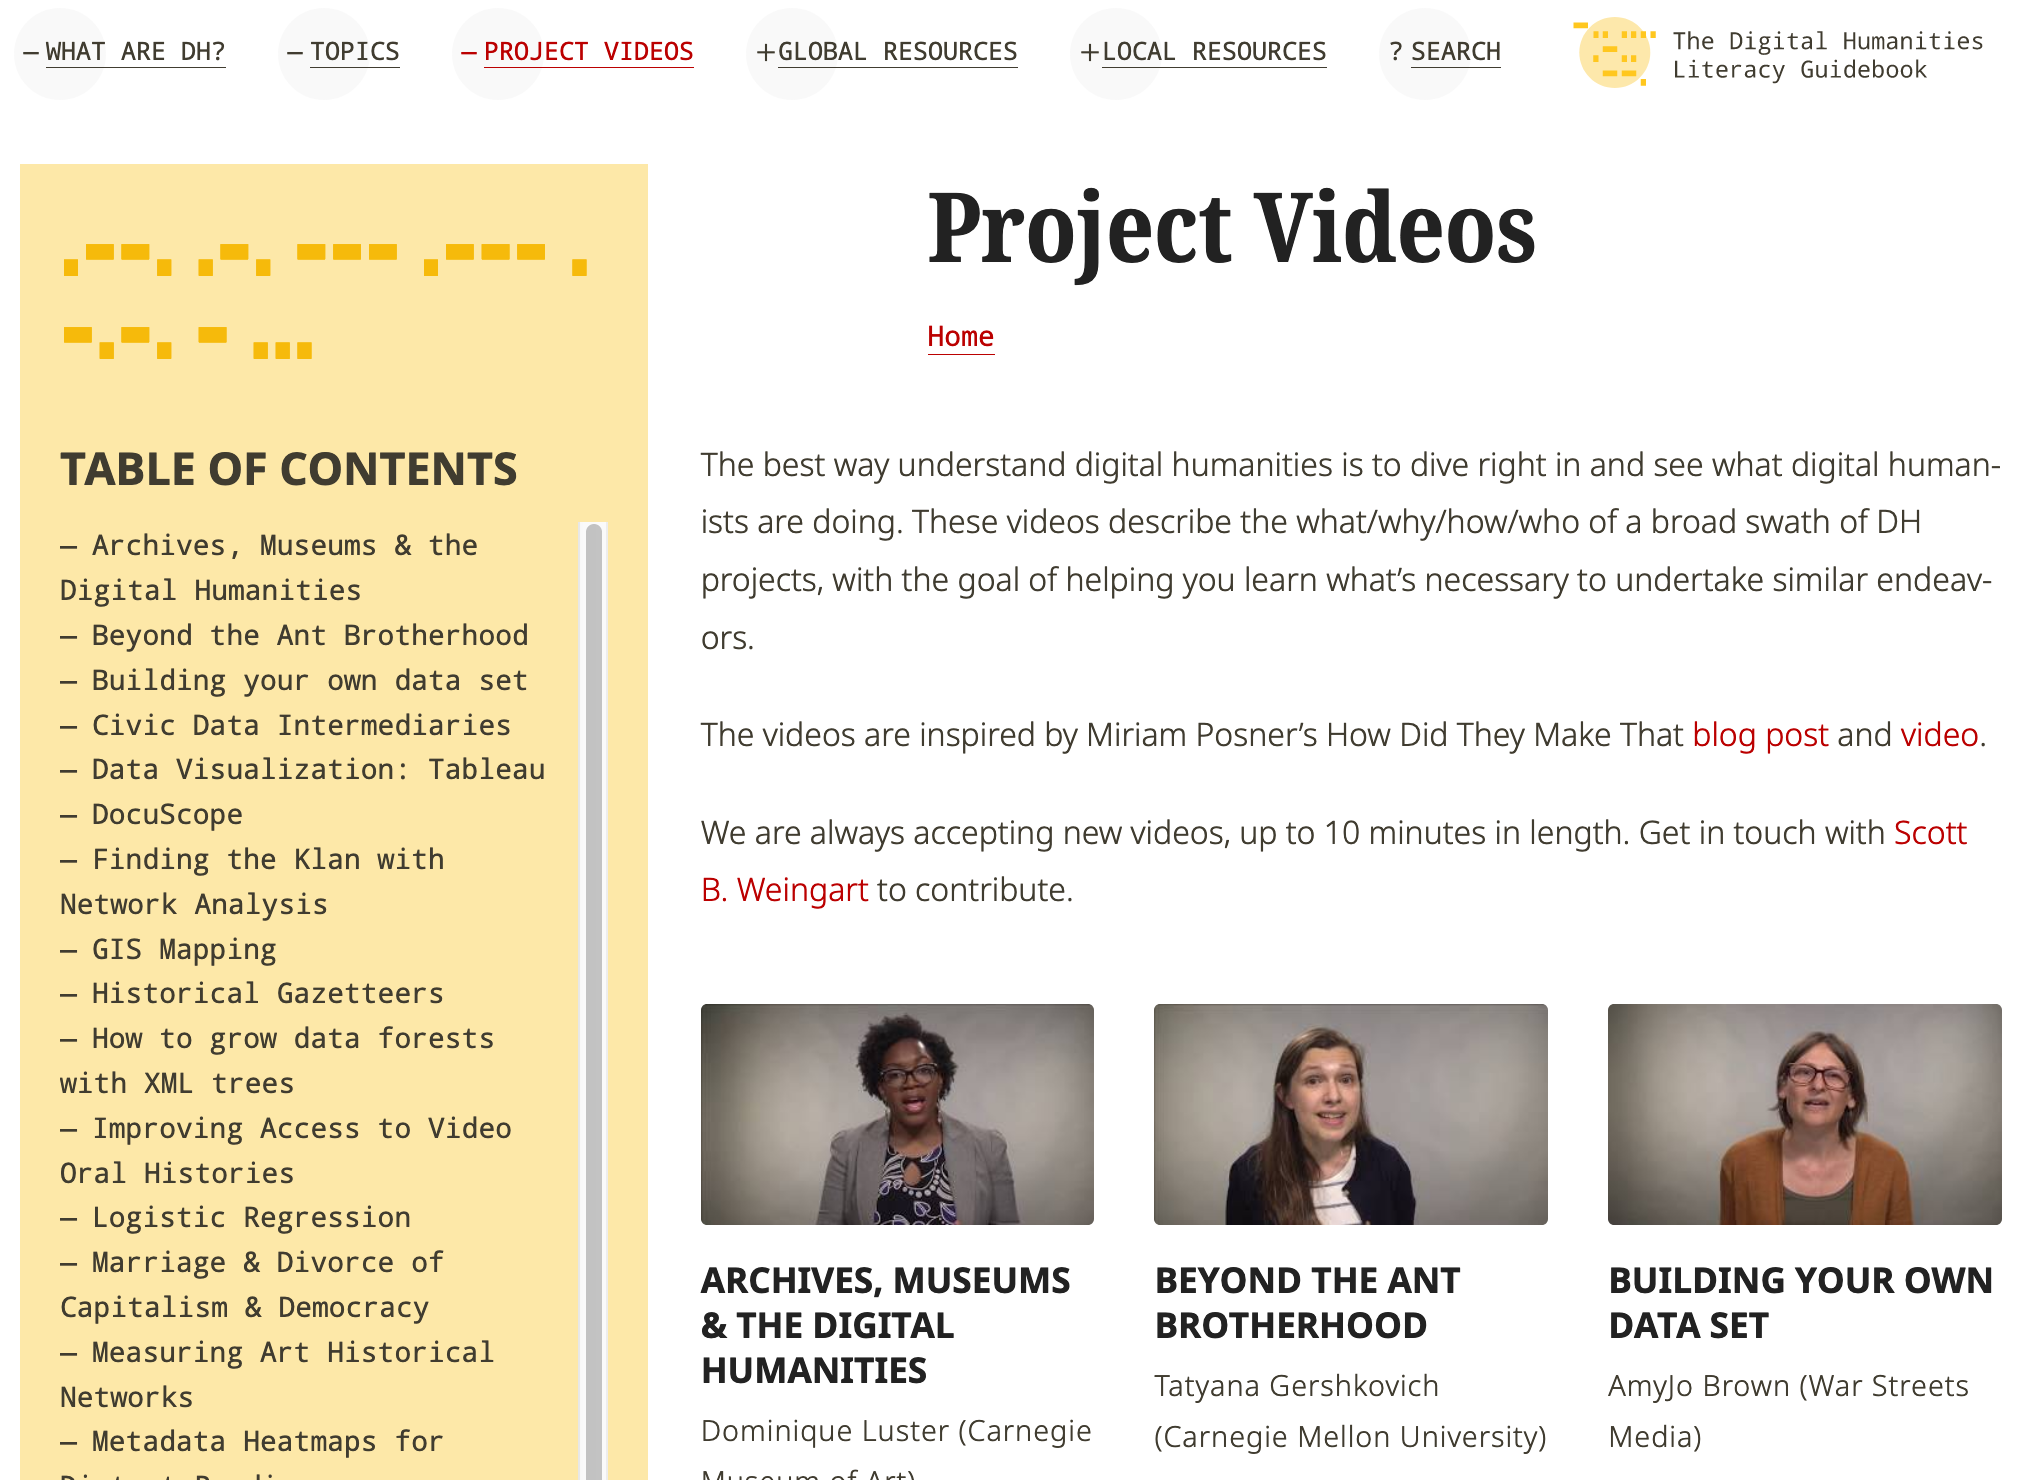 The project videos page of the Digital Humanities Literacy Guidebook